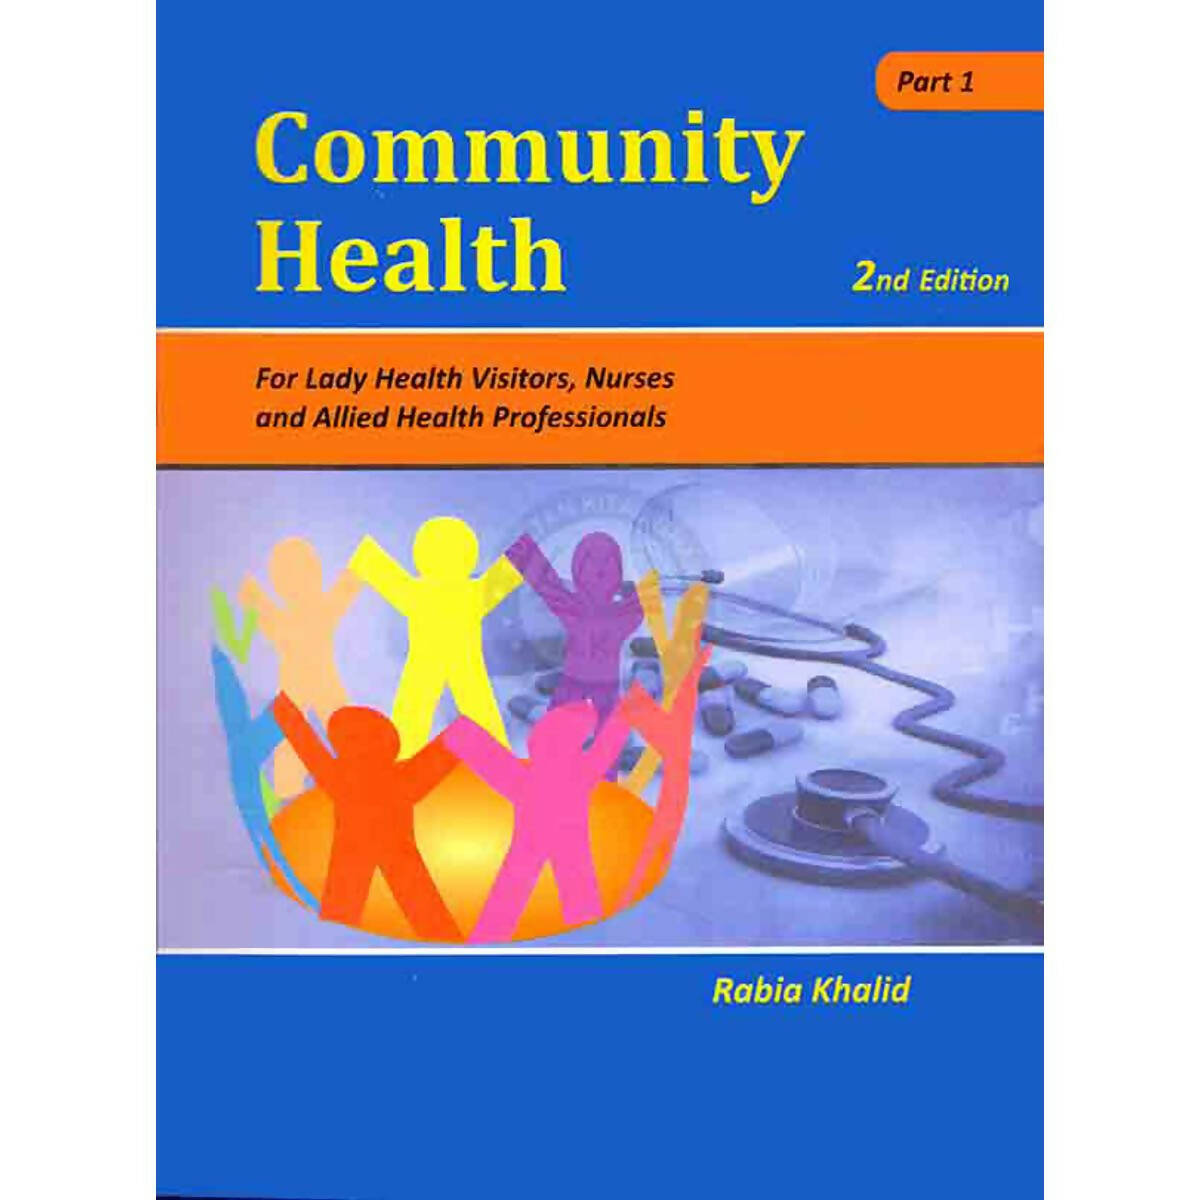 Community Health Book Part 1 2nd Edition